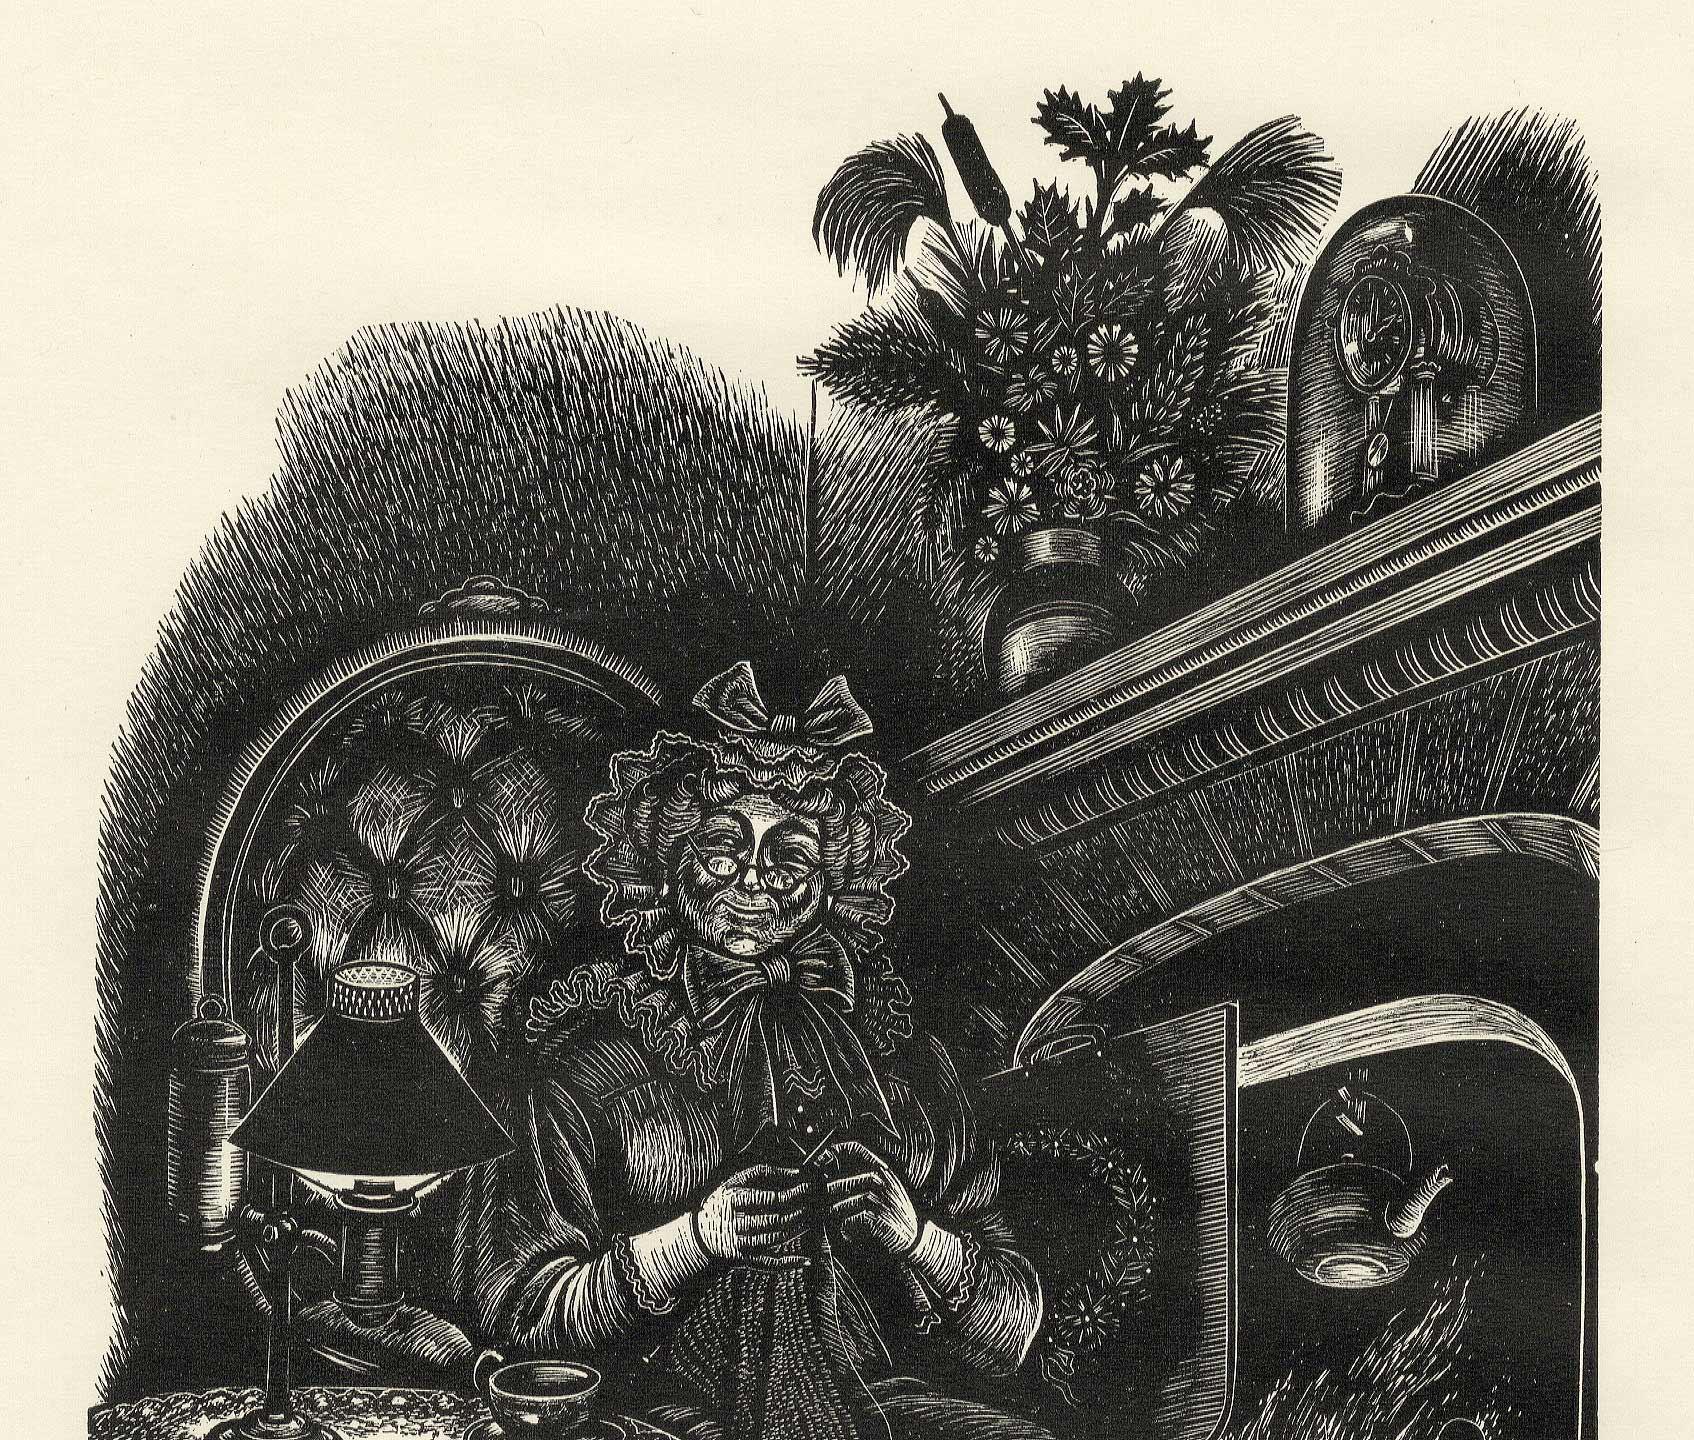 Mrs. Fairfax (Housekeeper at Thornfield Hall in the novel, Jane Eyre) - Print by Fritz Eichenberg.